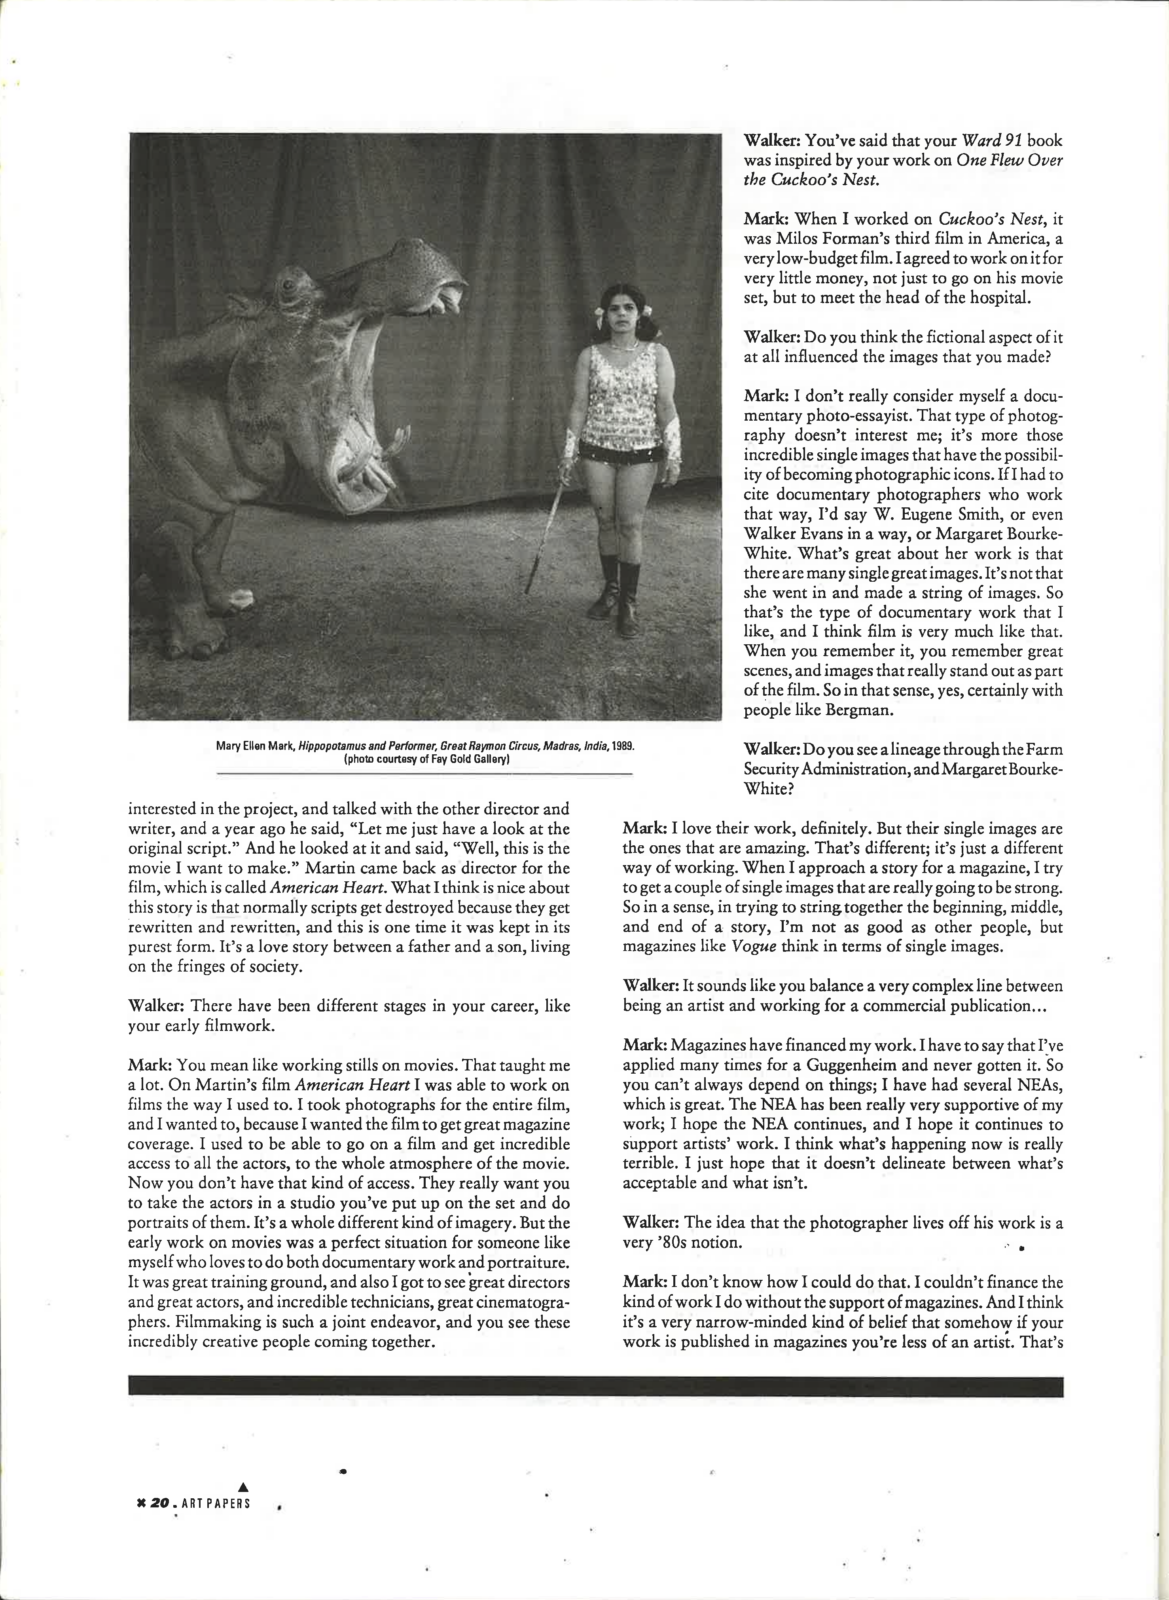 A black and white scan of the May/June 1992 edition of Art Papers featuring a black and white image at the top left of the page.